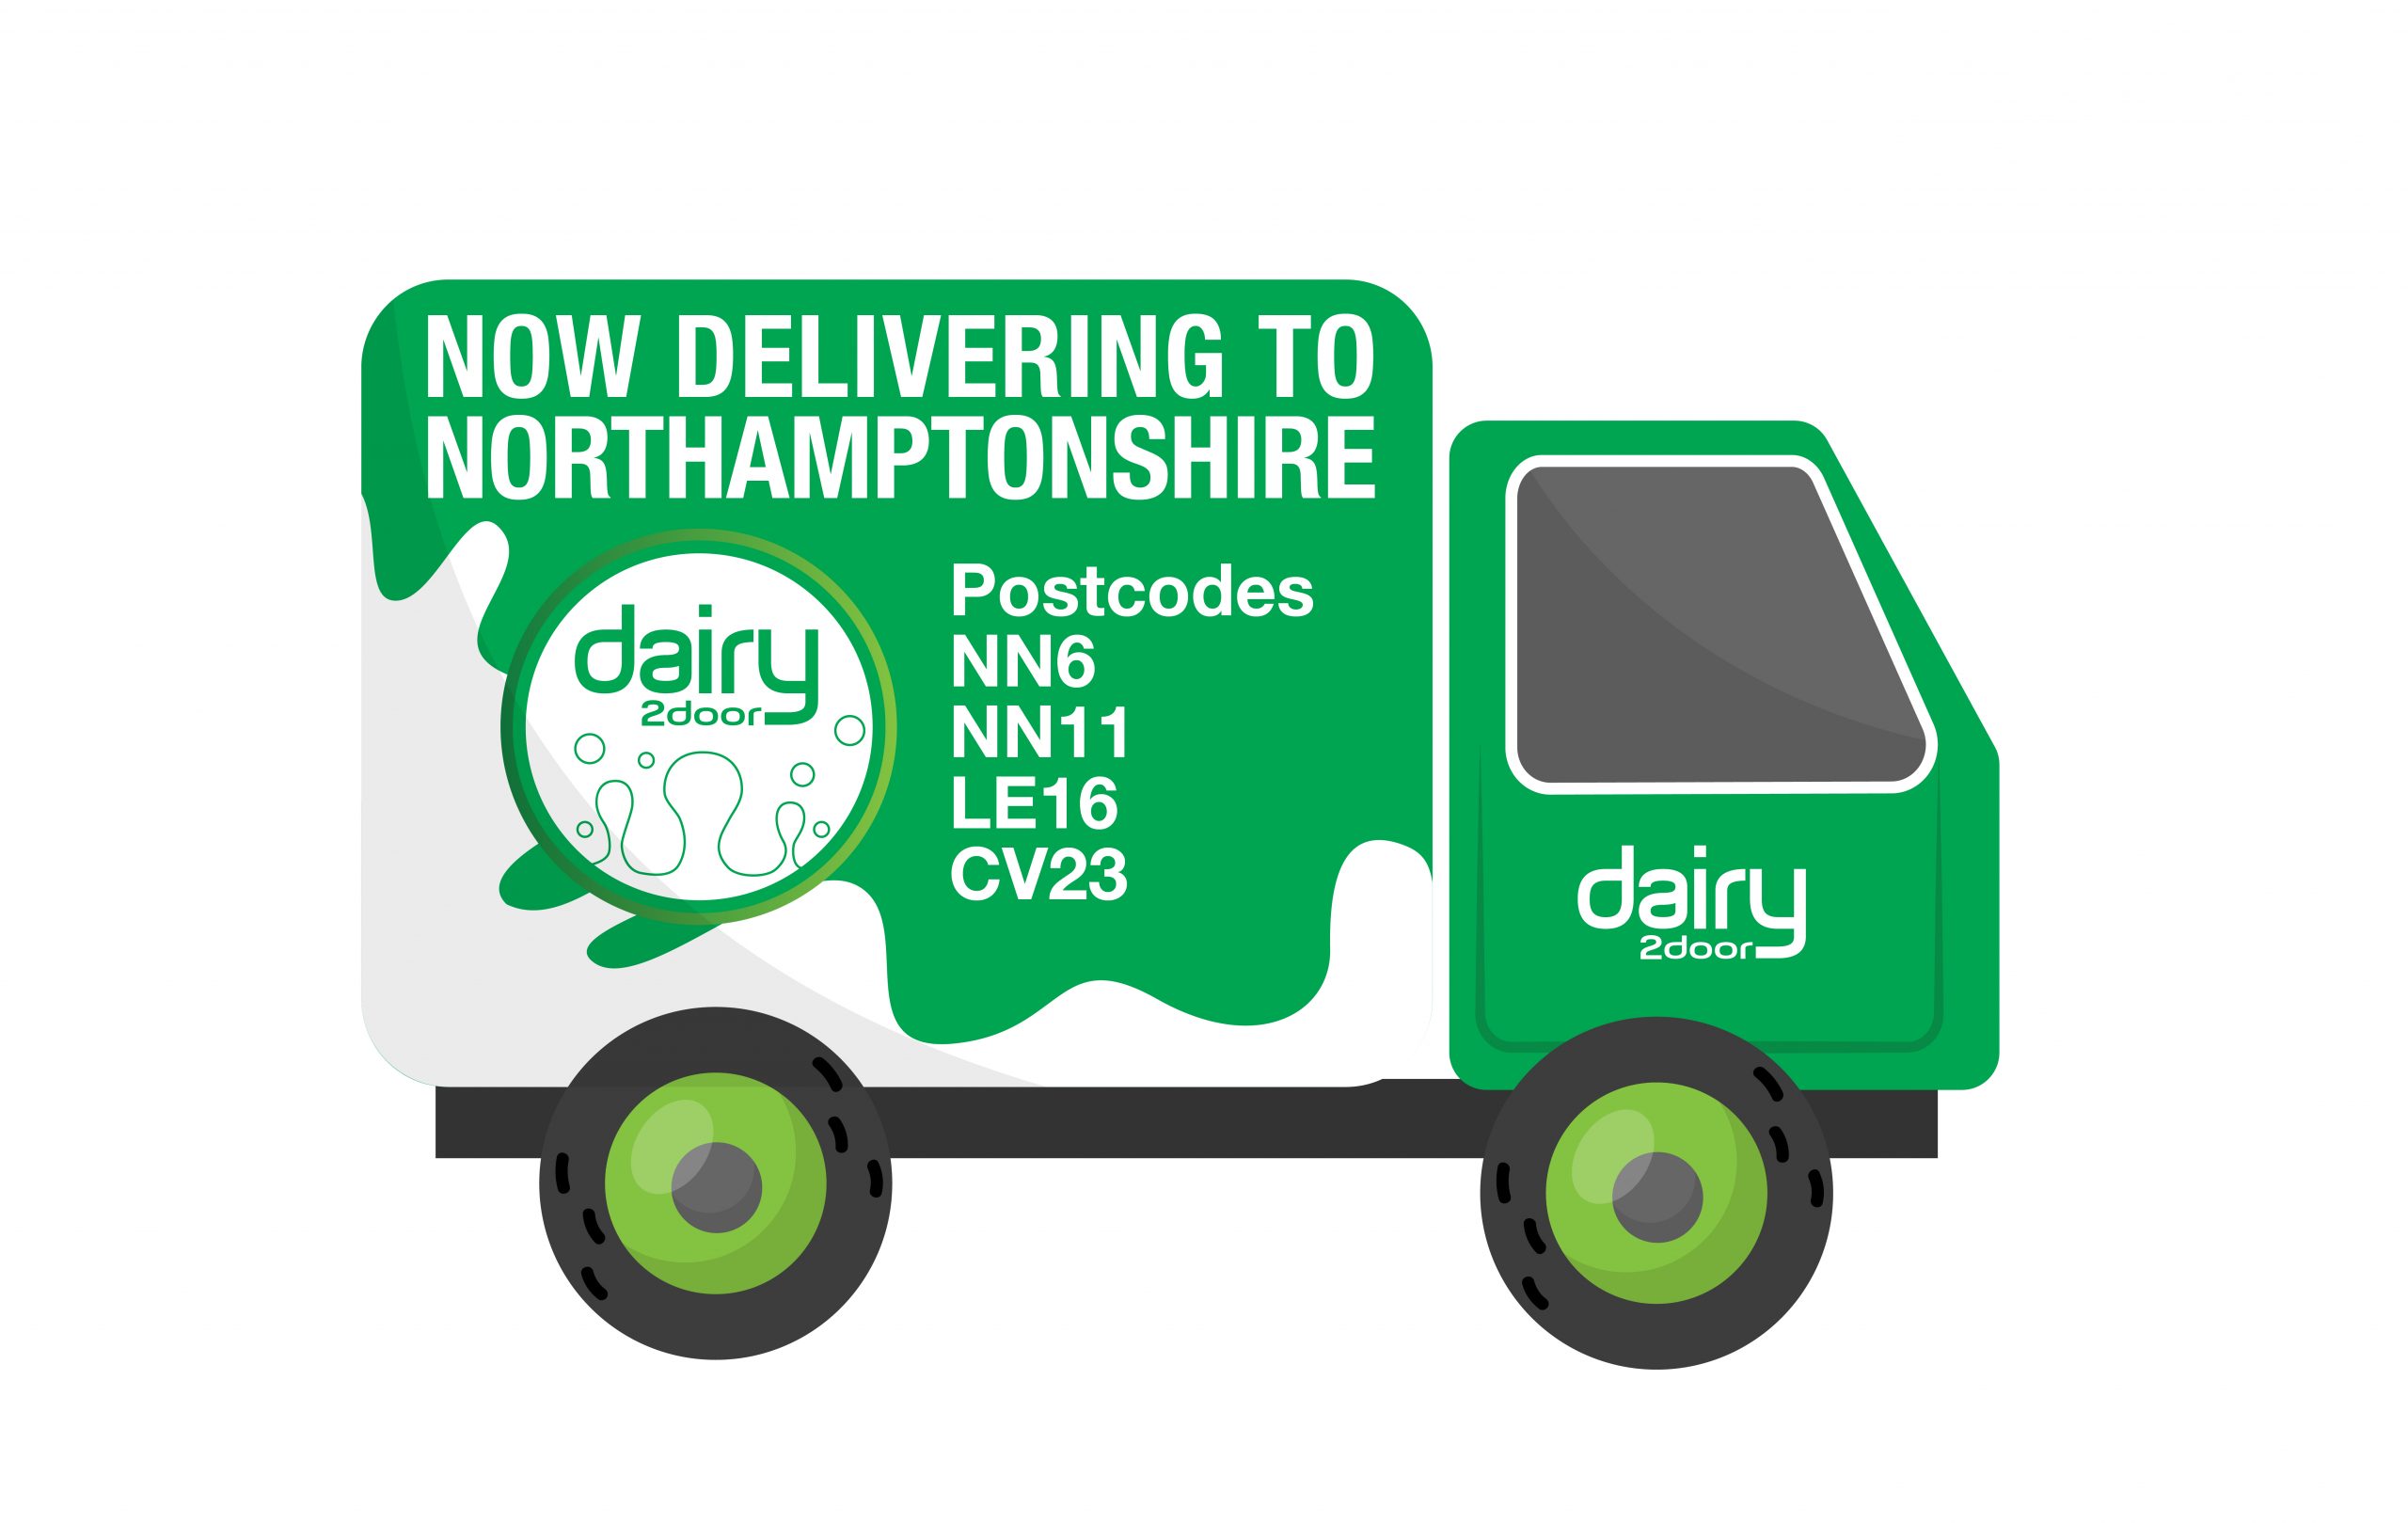 Now delivering to Northamptonshire